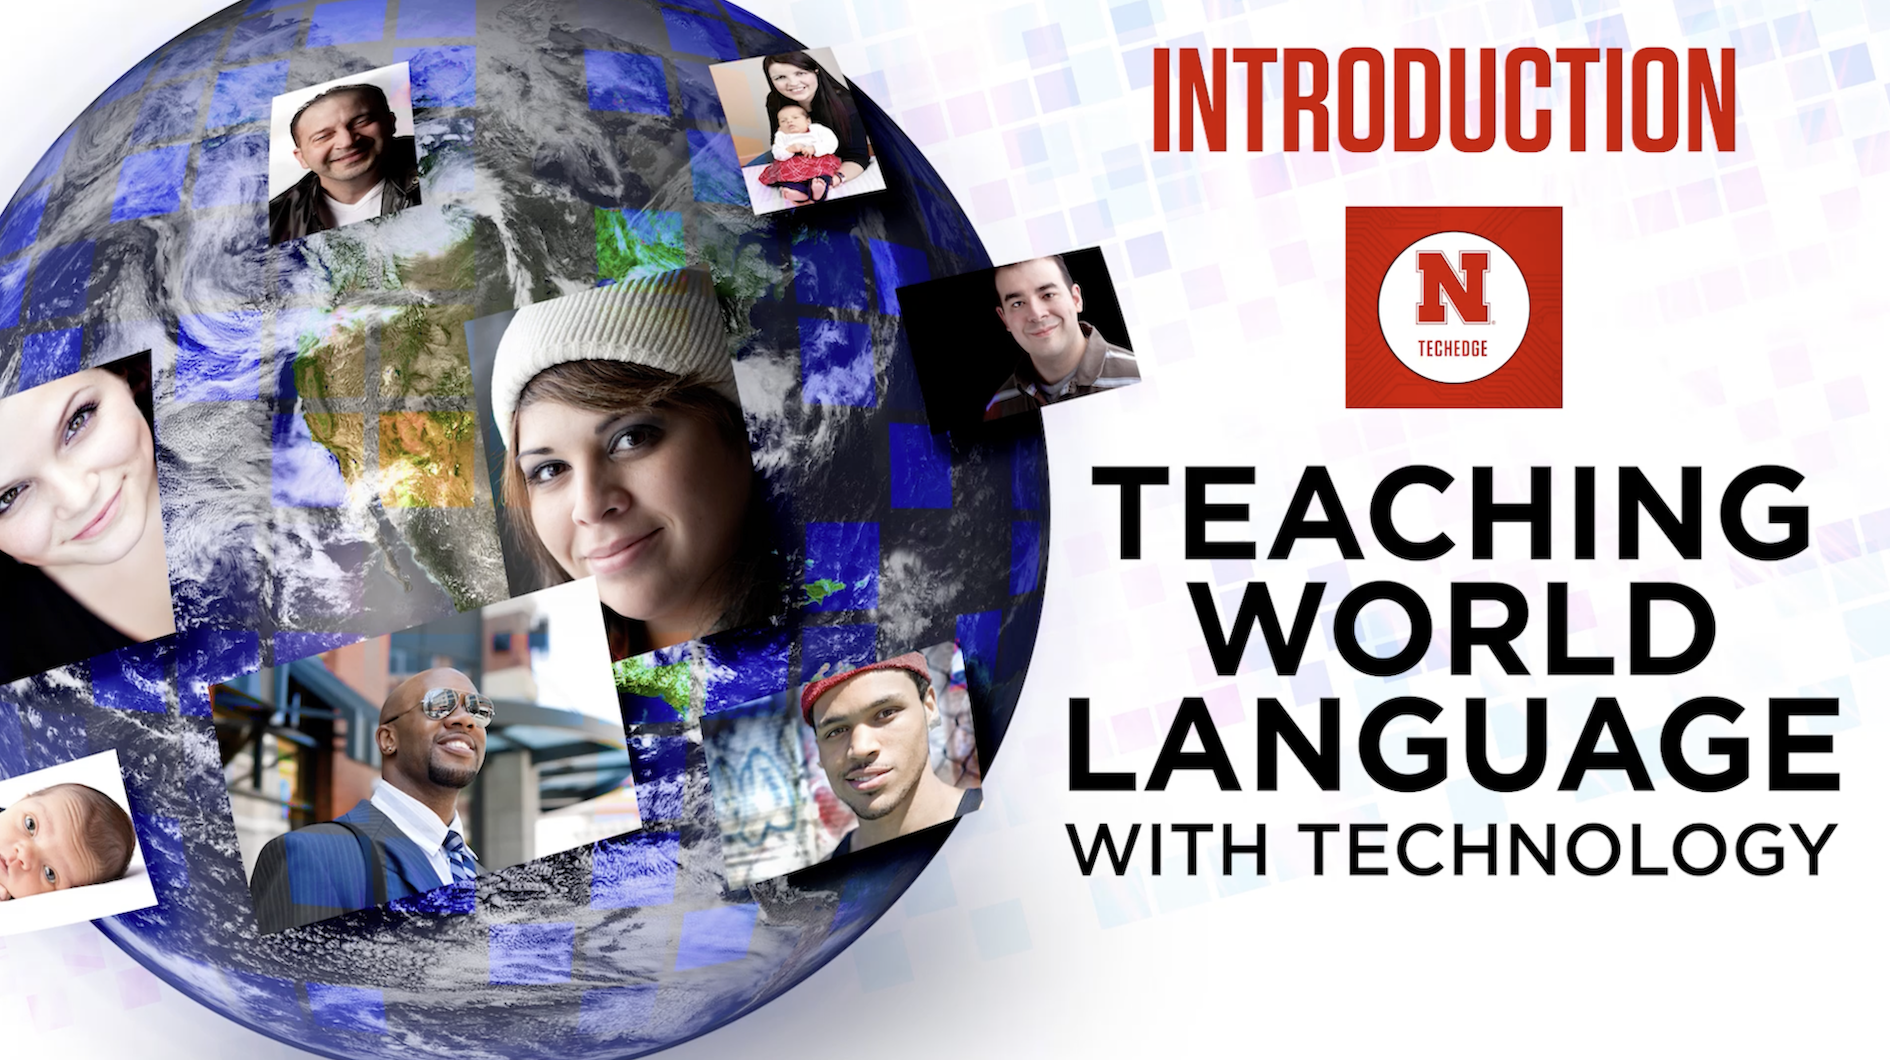 Tech EDGE - Teaching World Language with Technology Introduction